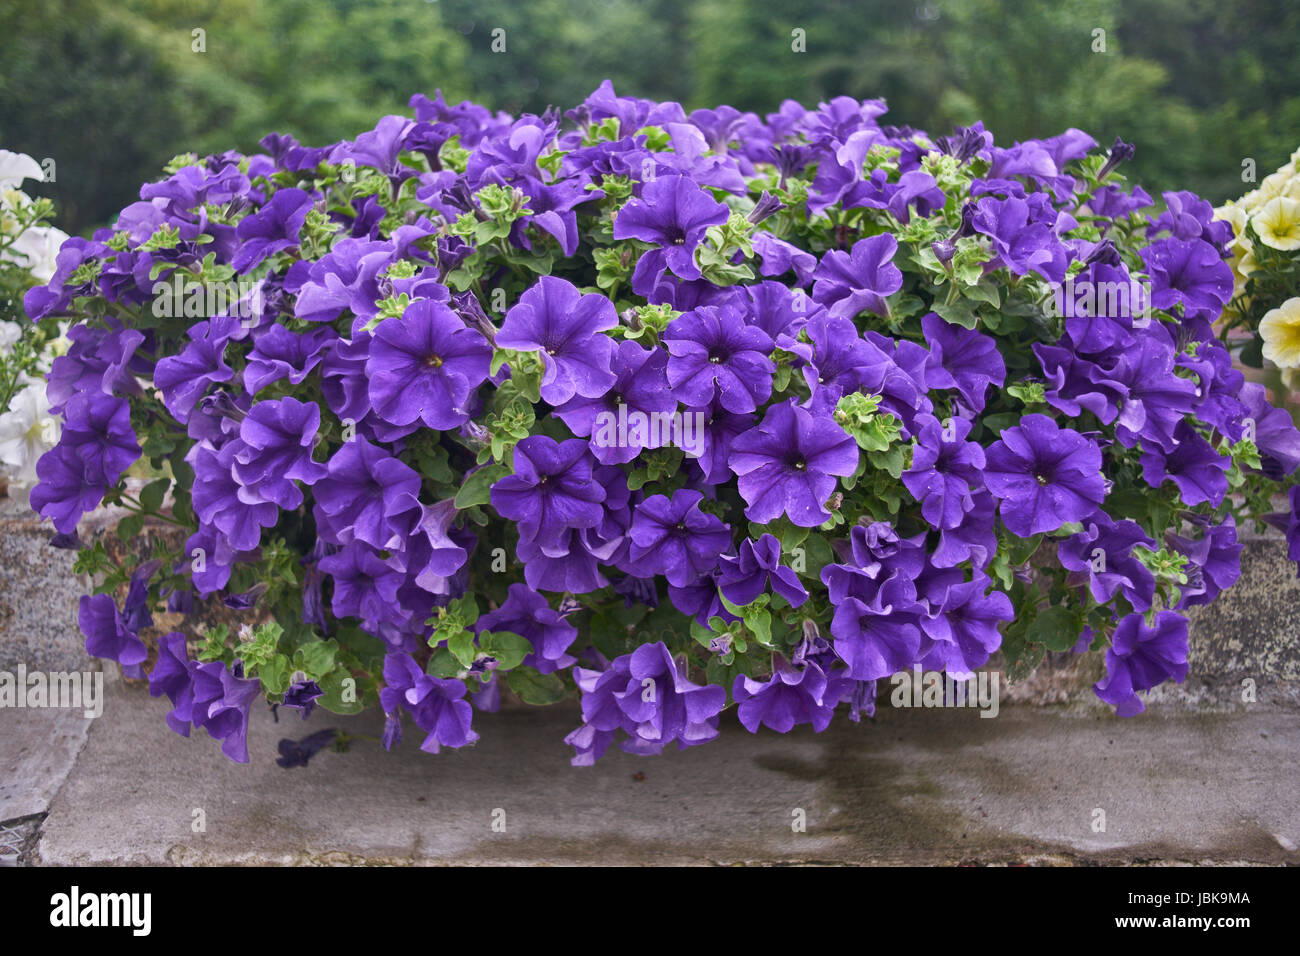 Plenty of violet petunias blossoming abundantly in the pot Stock Photo